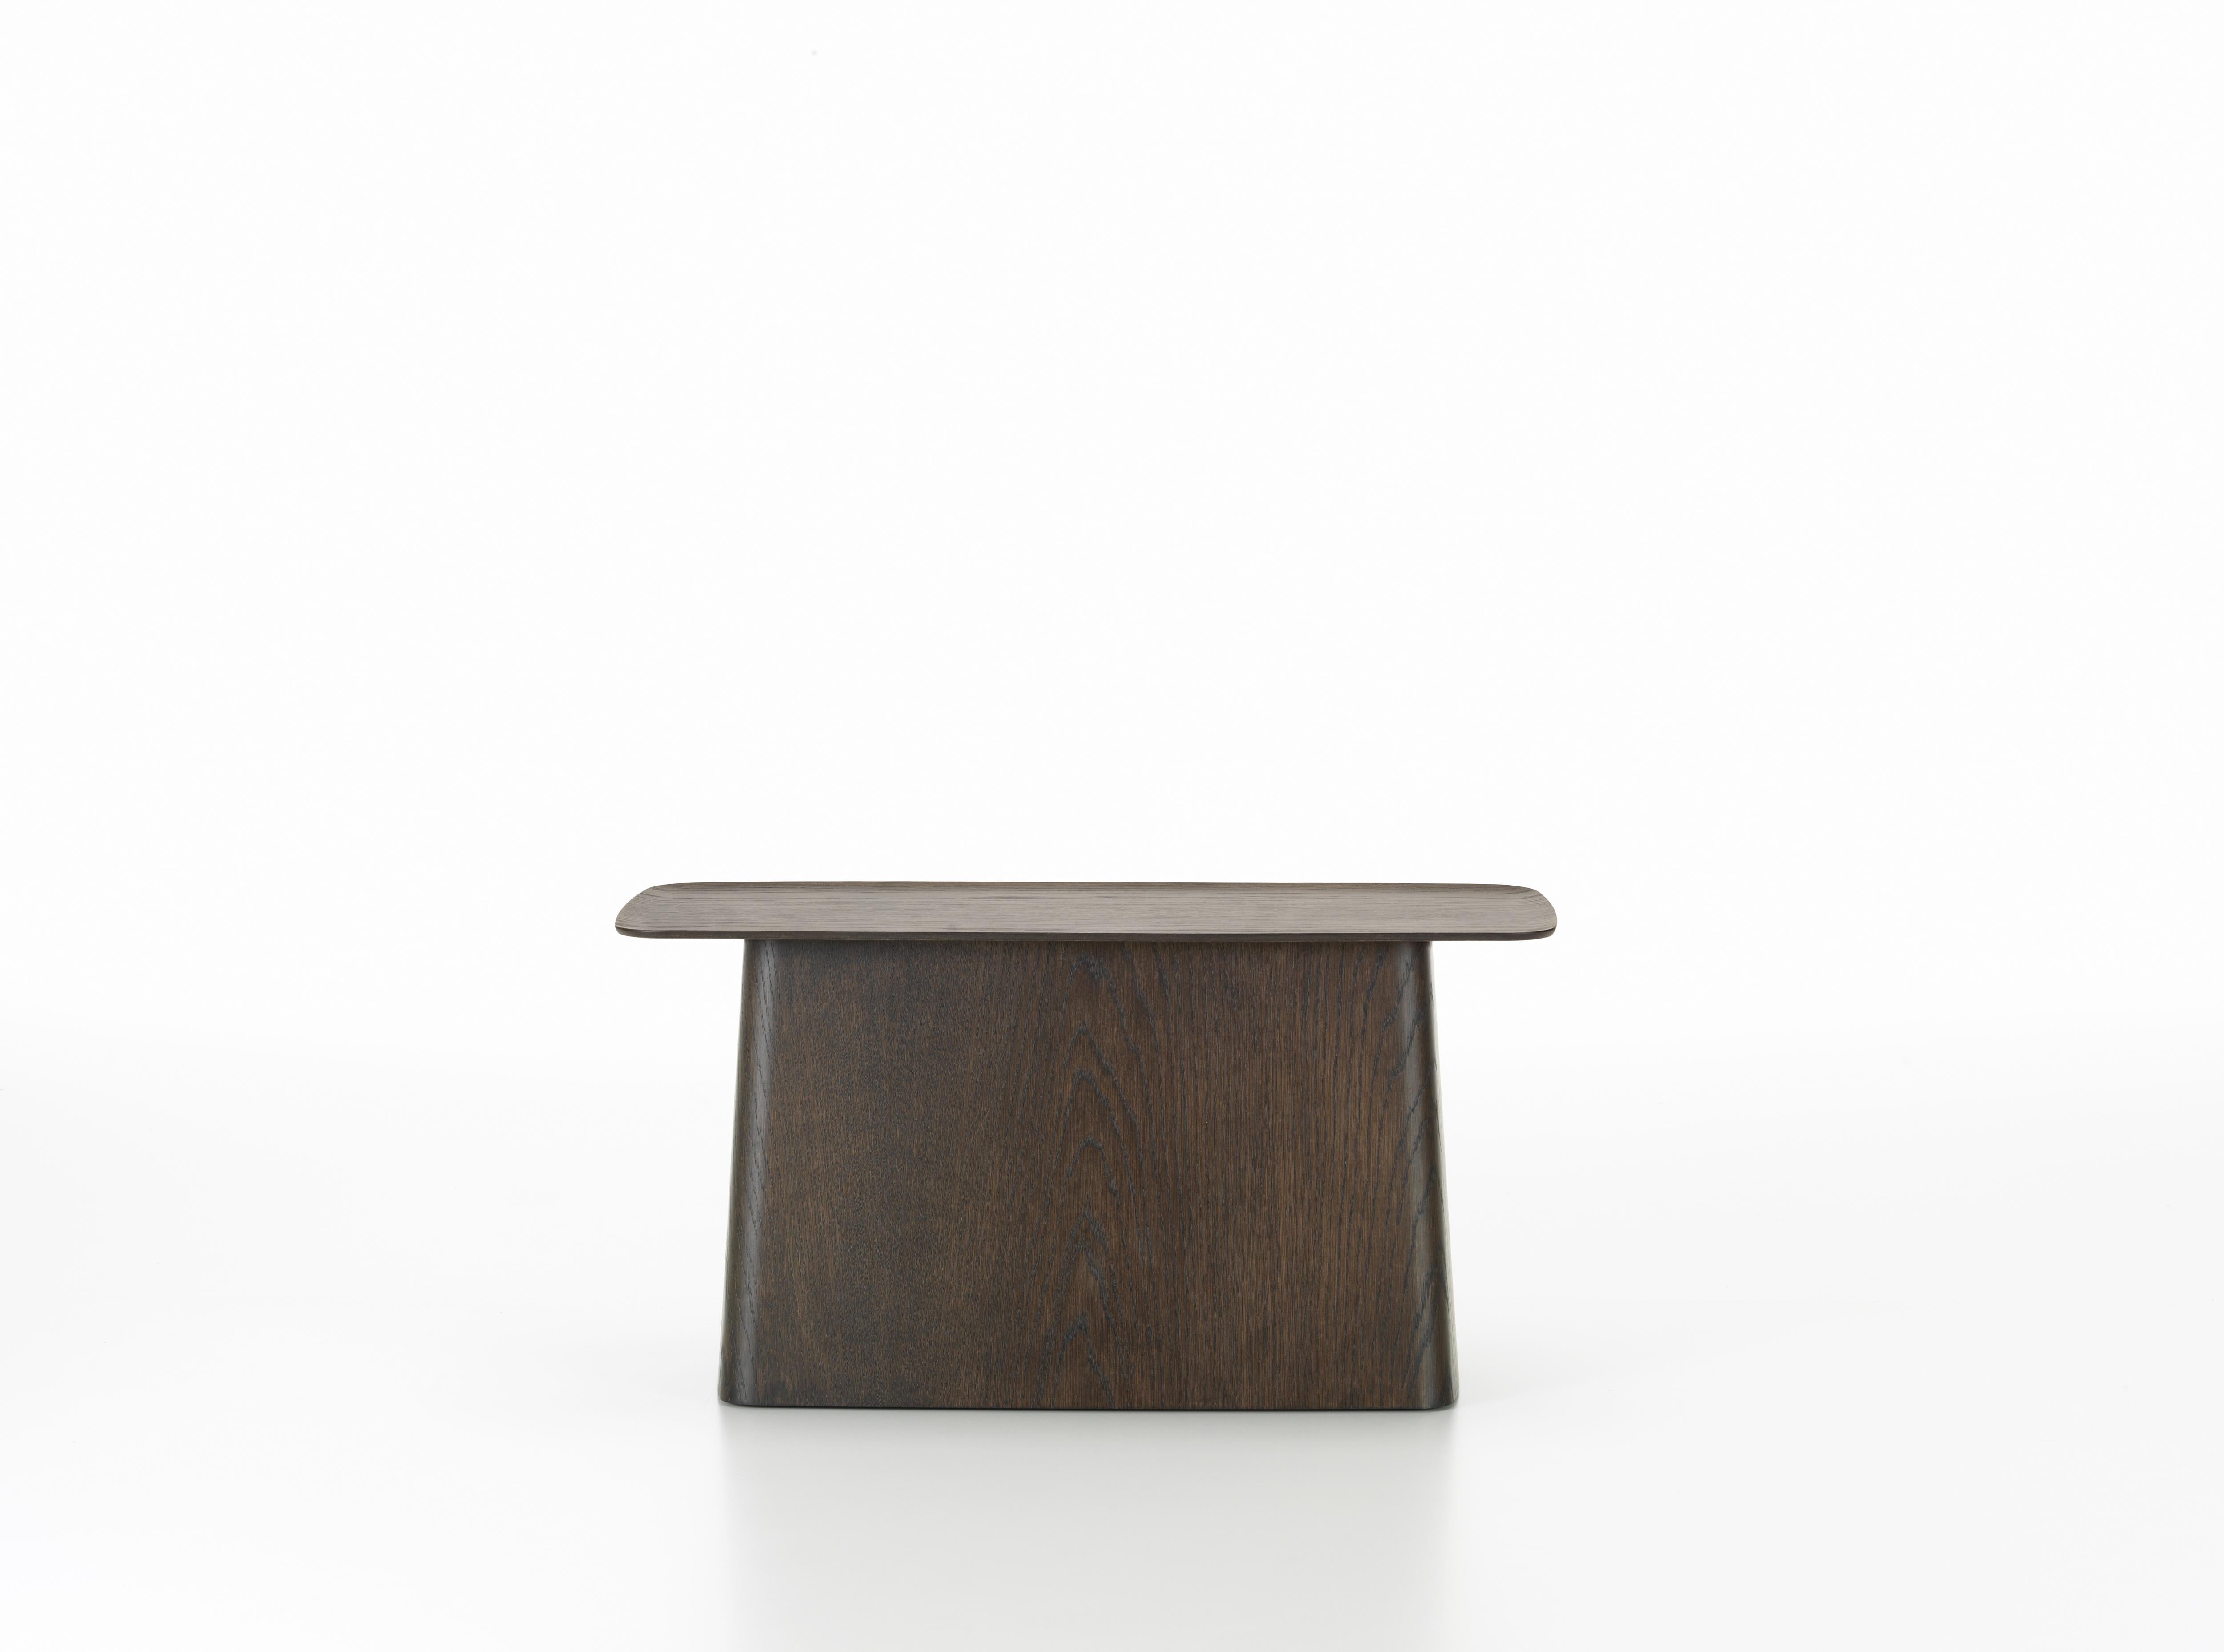 These products are only available in the United States.

The slender tops of the wooden side tables by Ronan and Erwan Bouroullec have a lightly curved lip, lending them an elegant, almost Japanese look. The lightweight occasional tables come in